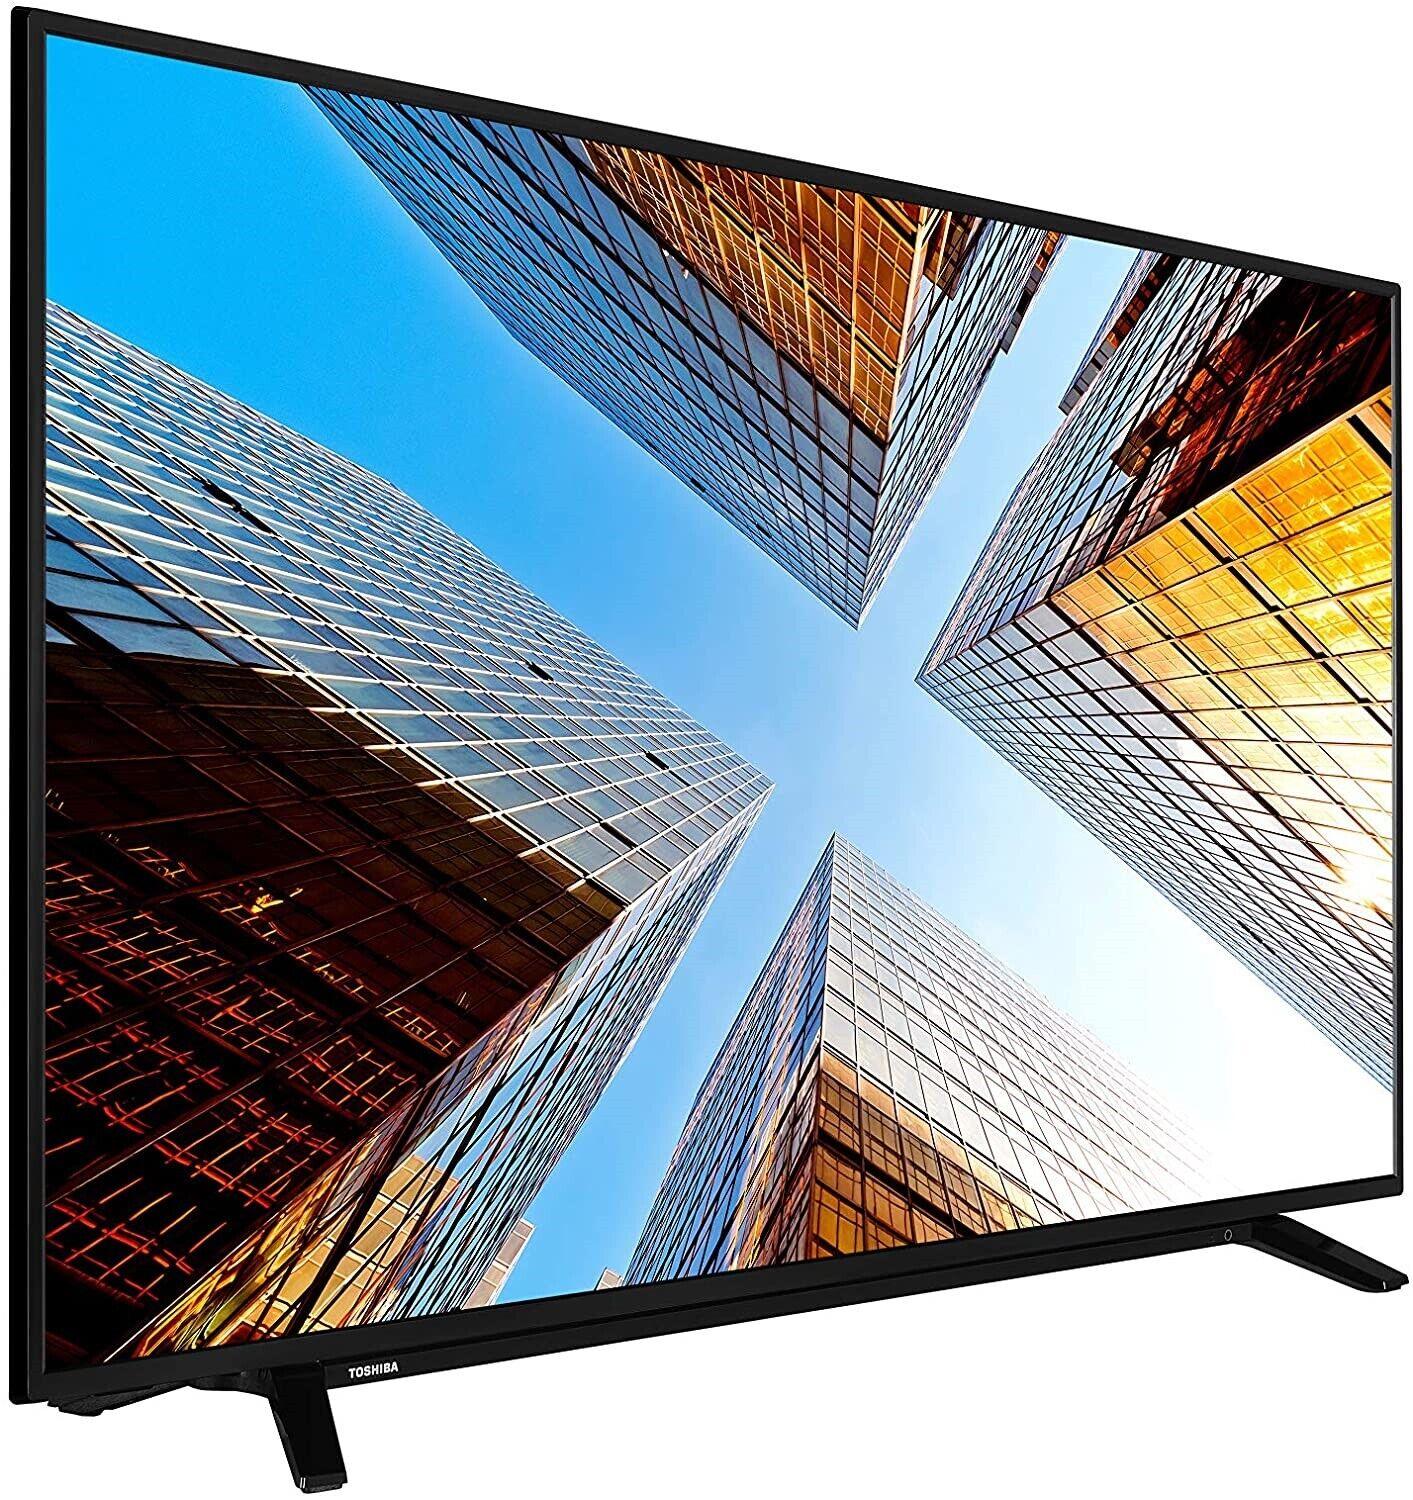 Toshiba 50UL2063DB 50-Inch Smart 4K Ultra-HD LED TV COLLECTION ONLY U - Smart Clear Vision